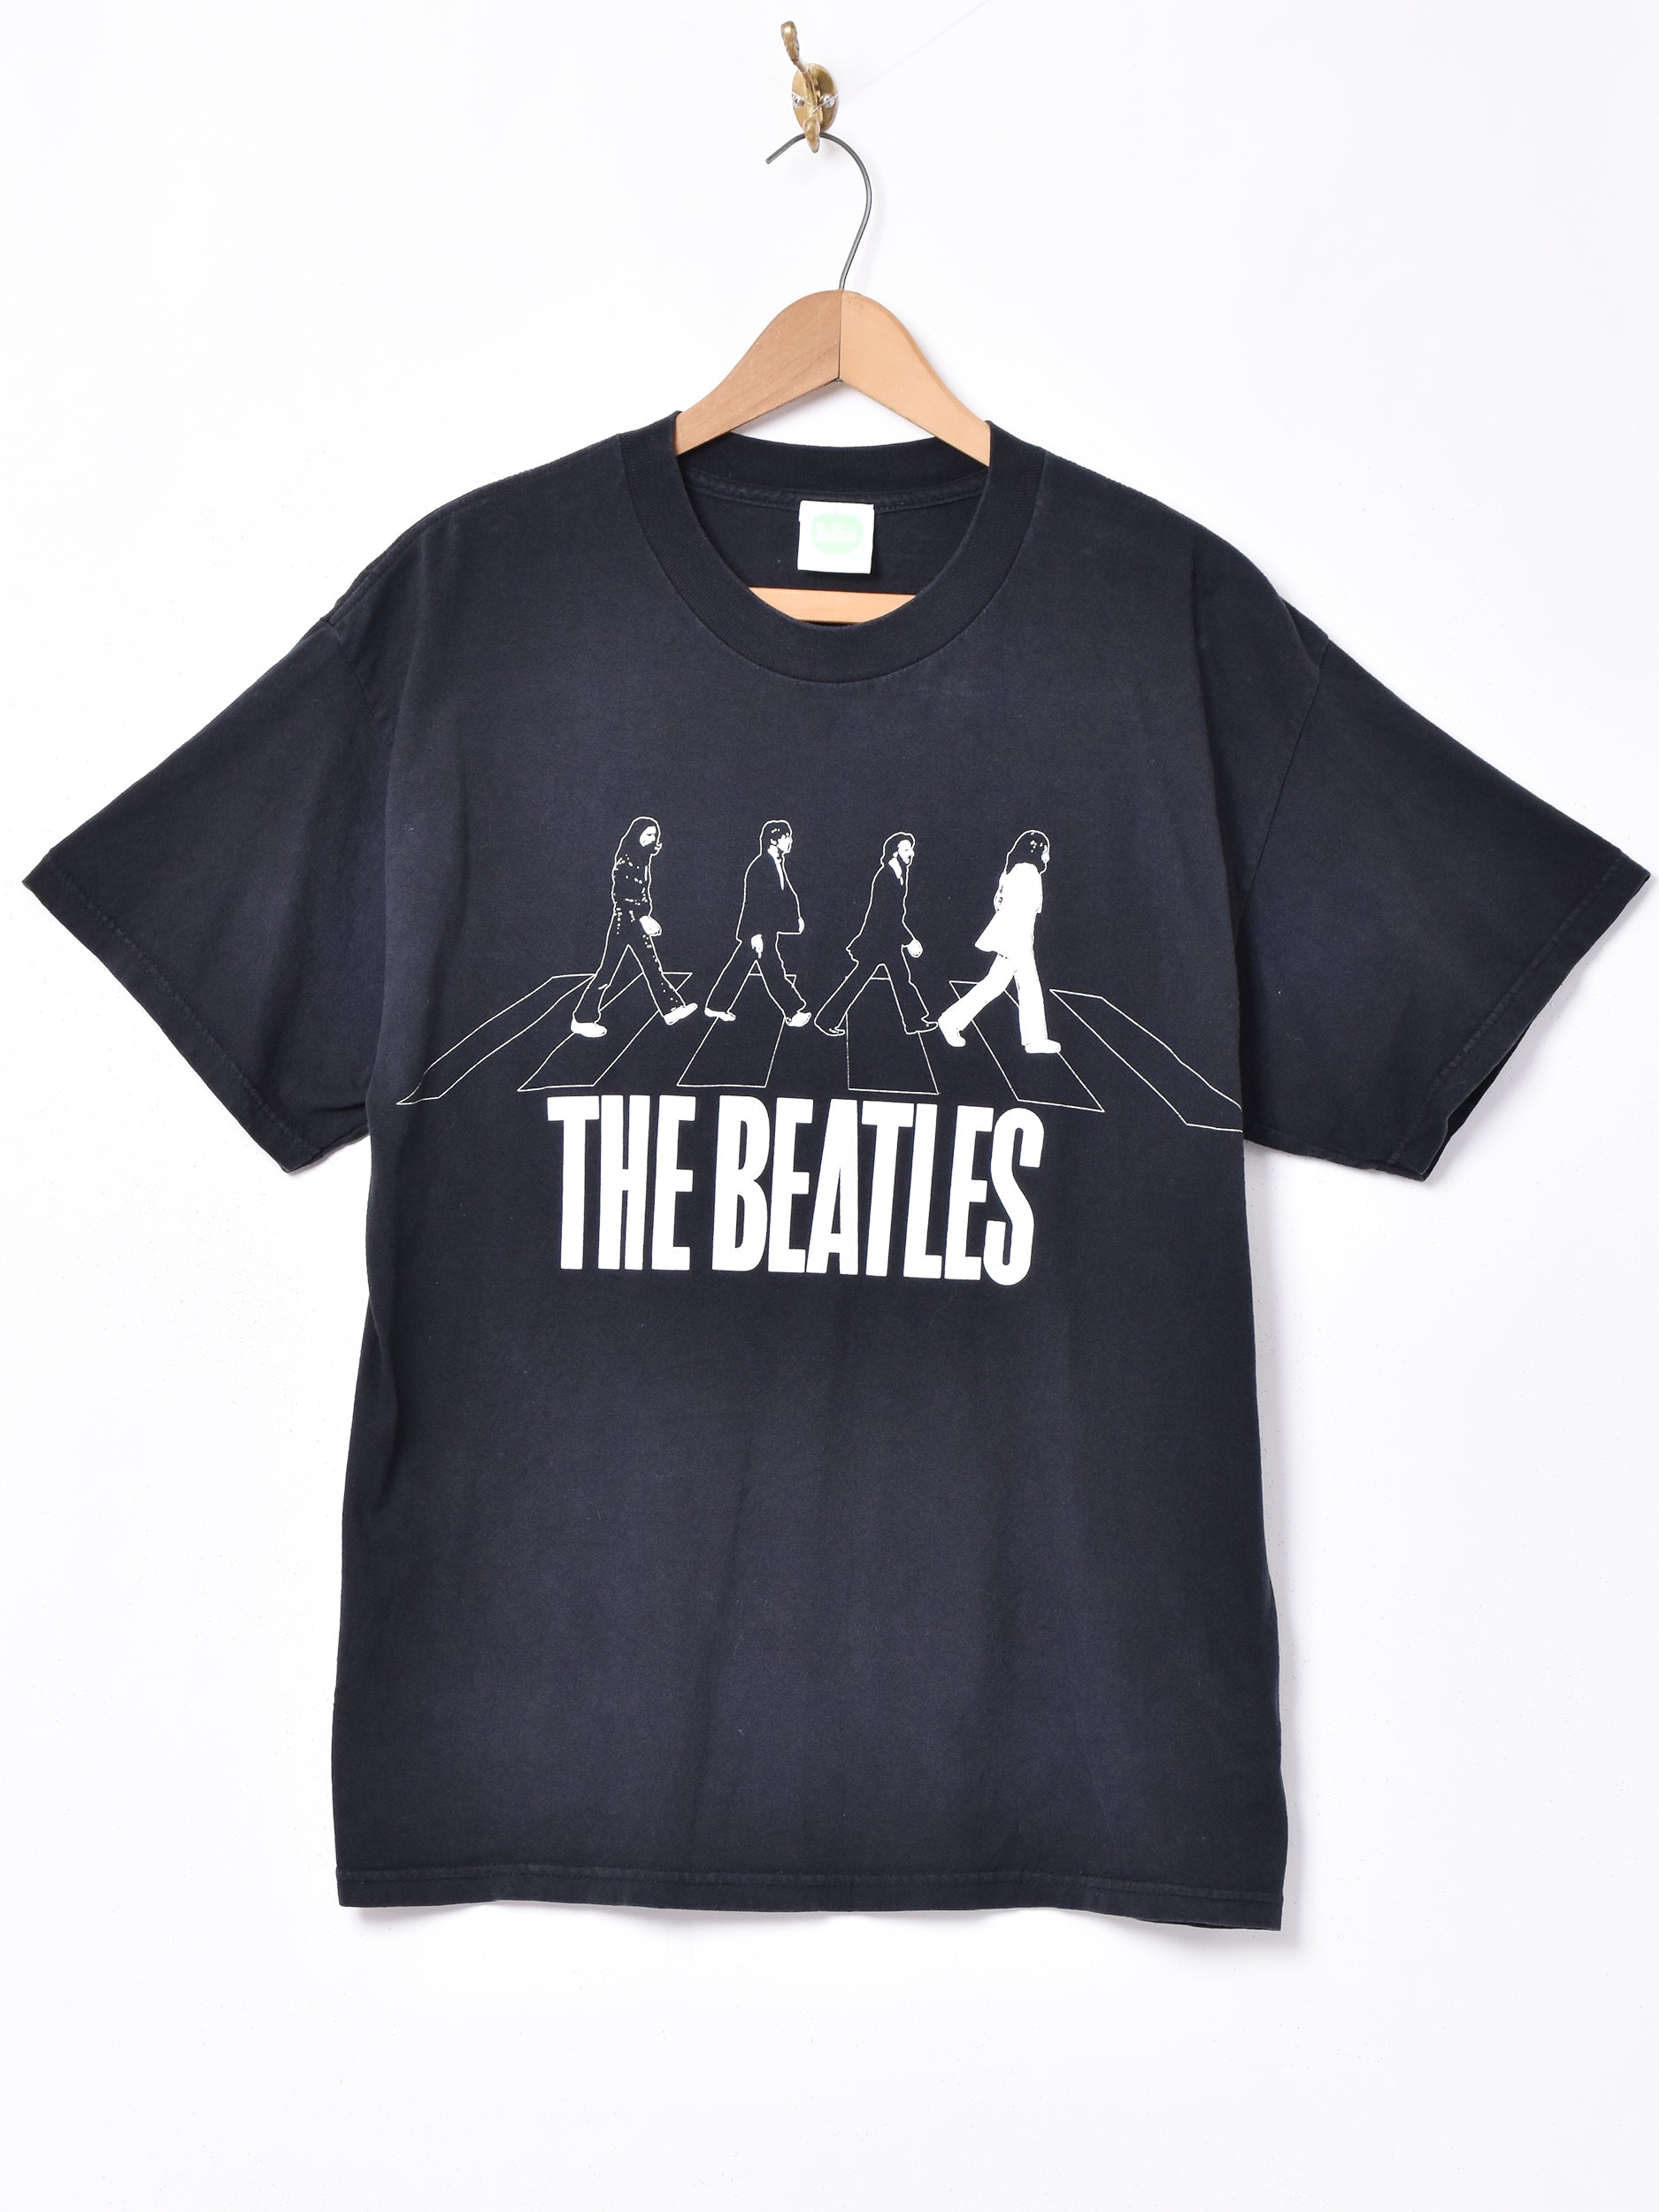 The Beatles プリントTシャツ – 古着屋Top of the Hillのネット通販サイト